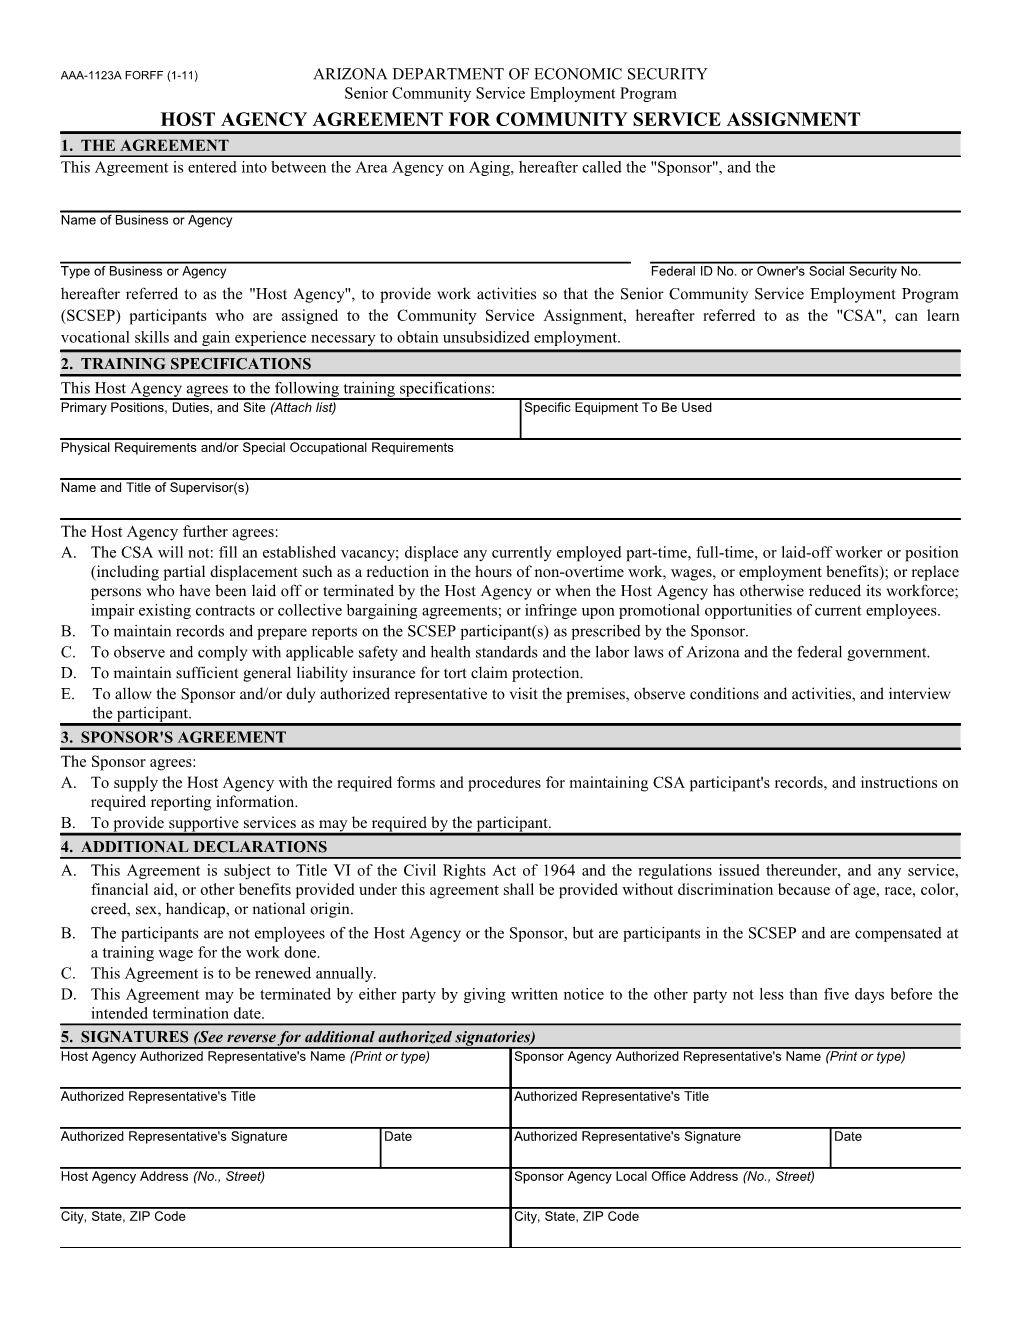 Host Agency Agreement for Community Service Assignment